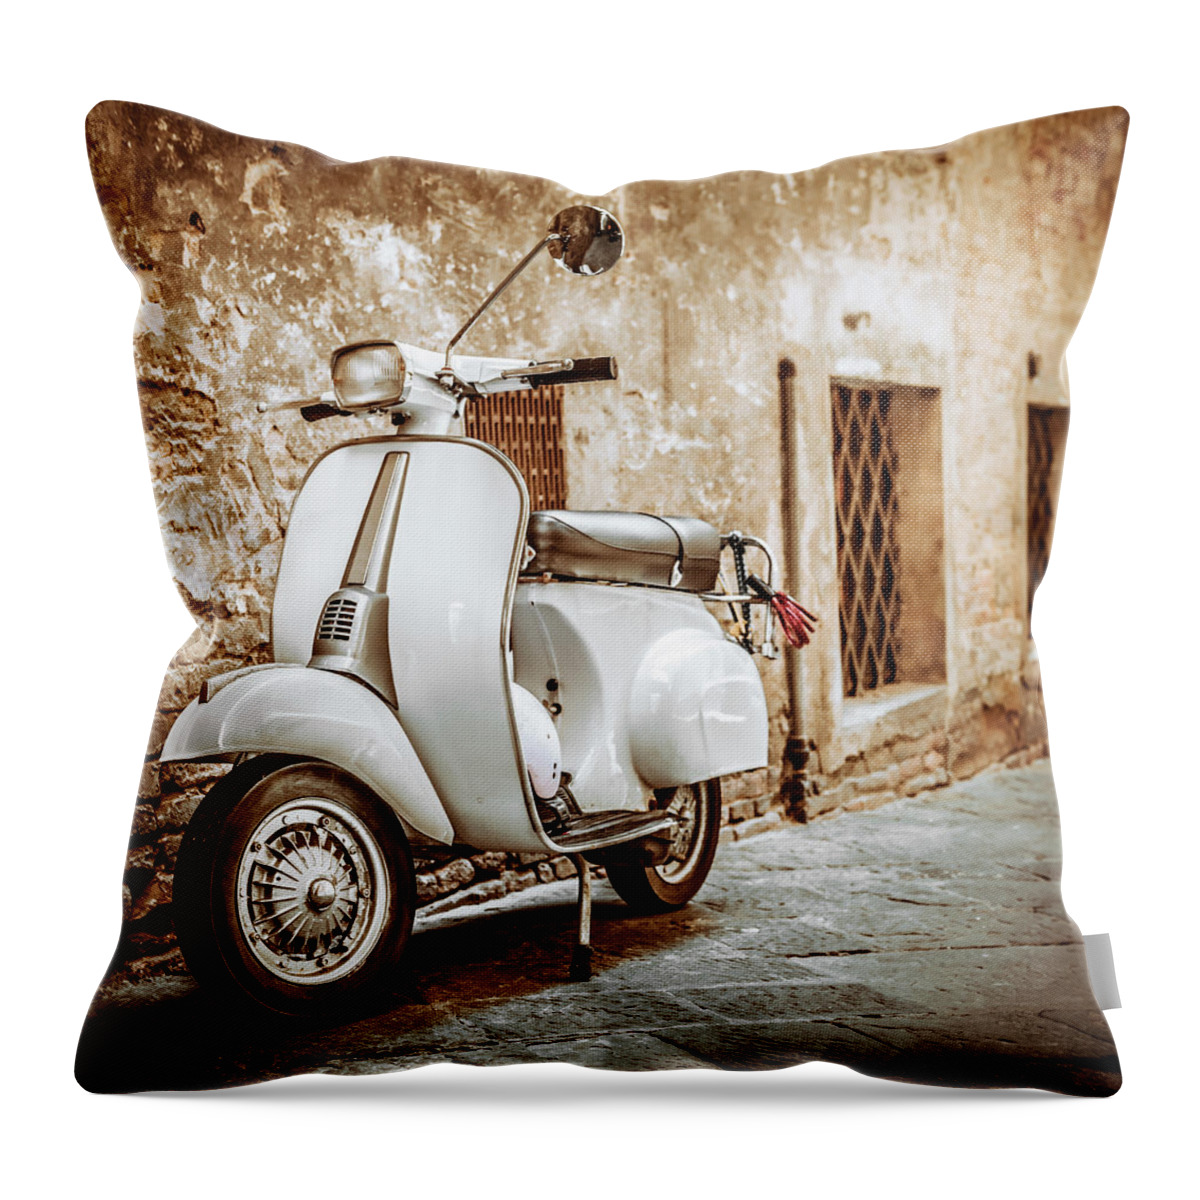 Mode Of Transport Throw Pillow featuring the photograph Italian Scooter In Grungy Alley by Giorgiomagini